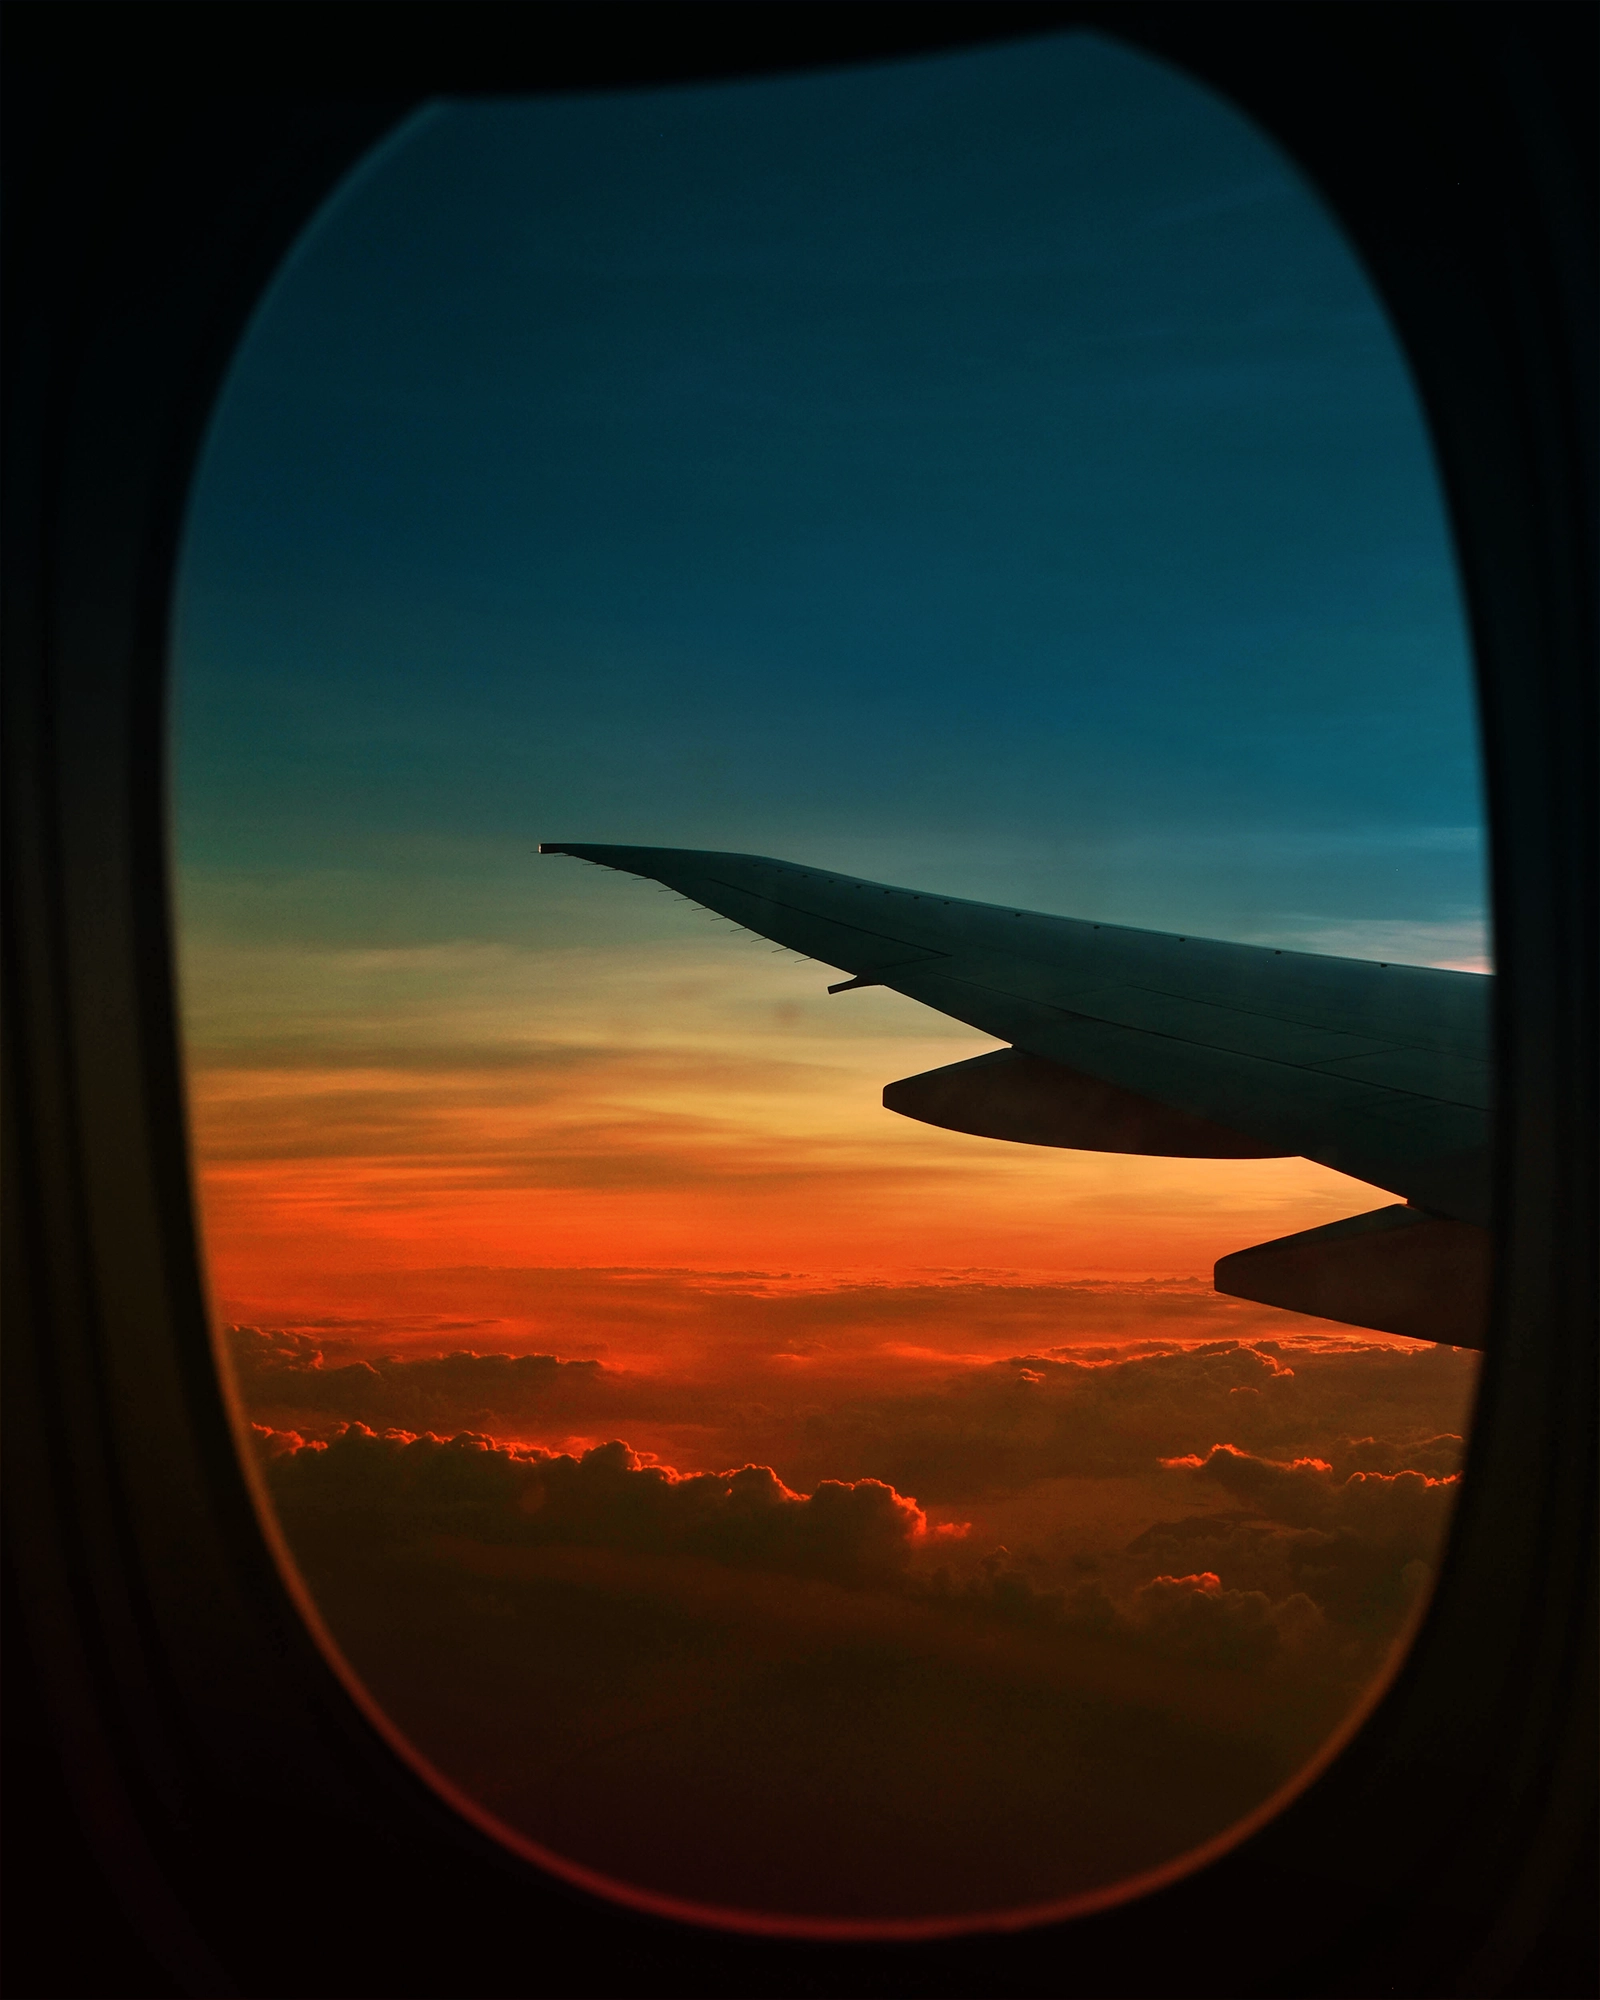 The wing of a plane in flight, seen through a cabin window